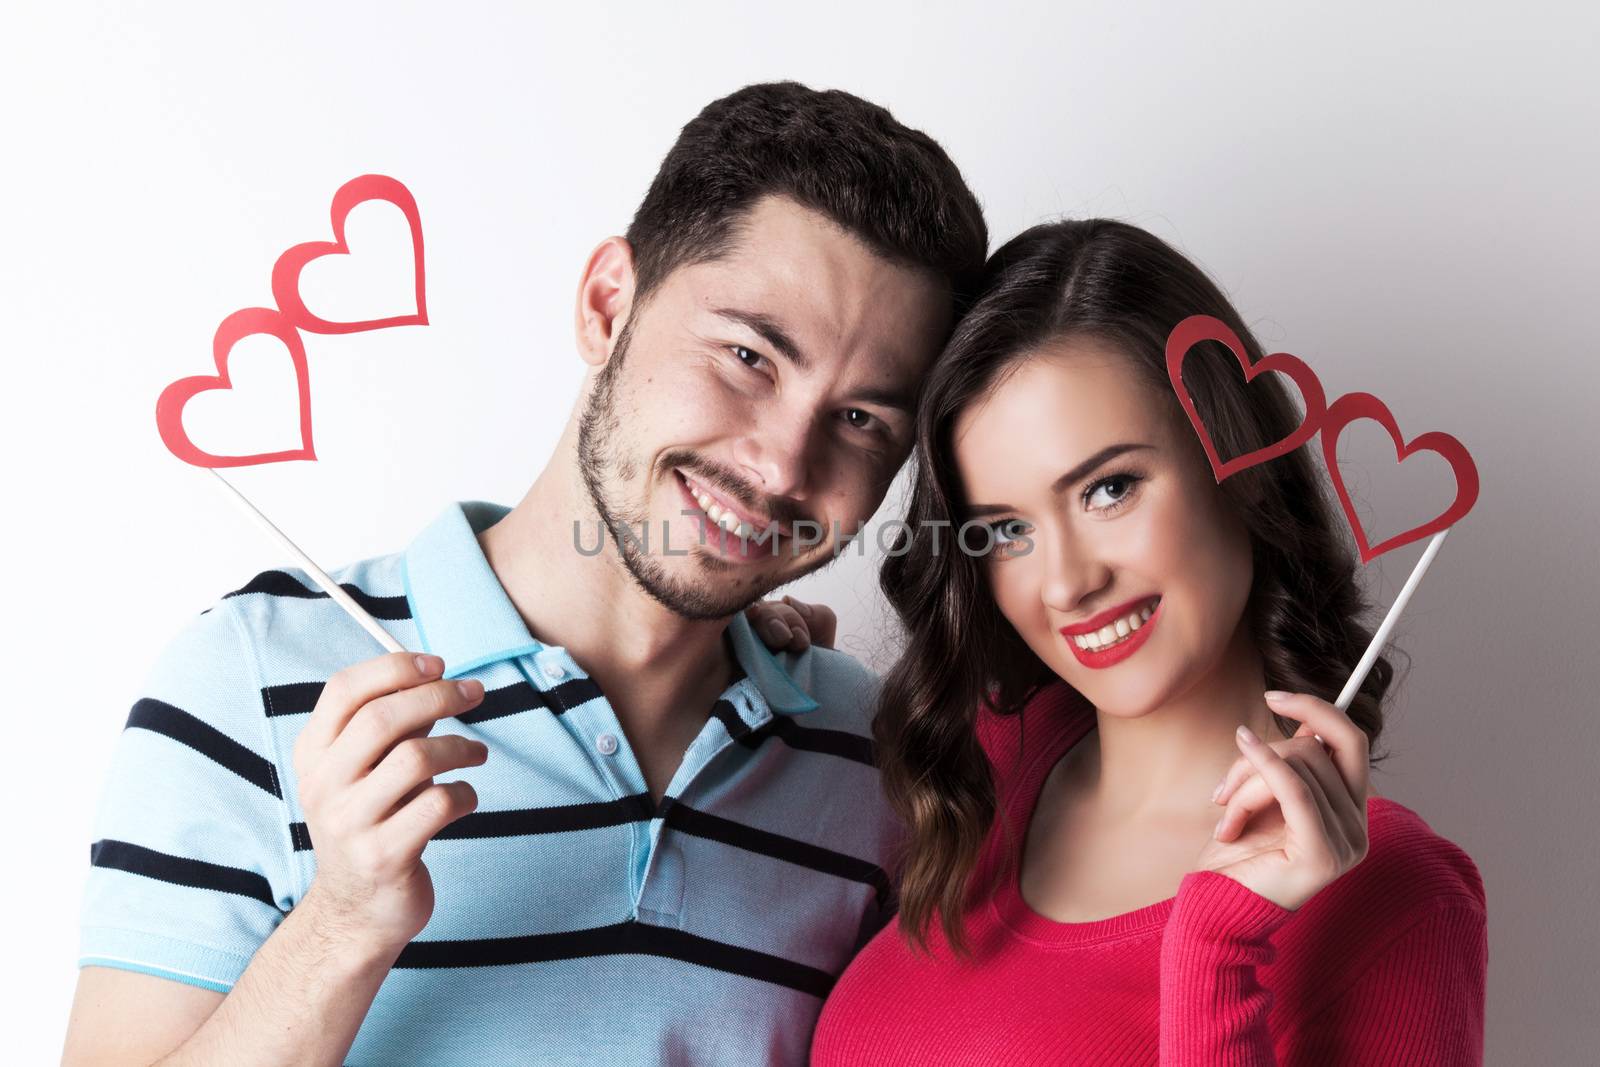 Happy smiling couple celebrating Valentine day with funny party heart shaped glasses on stick